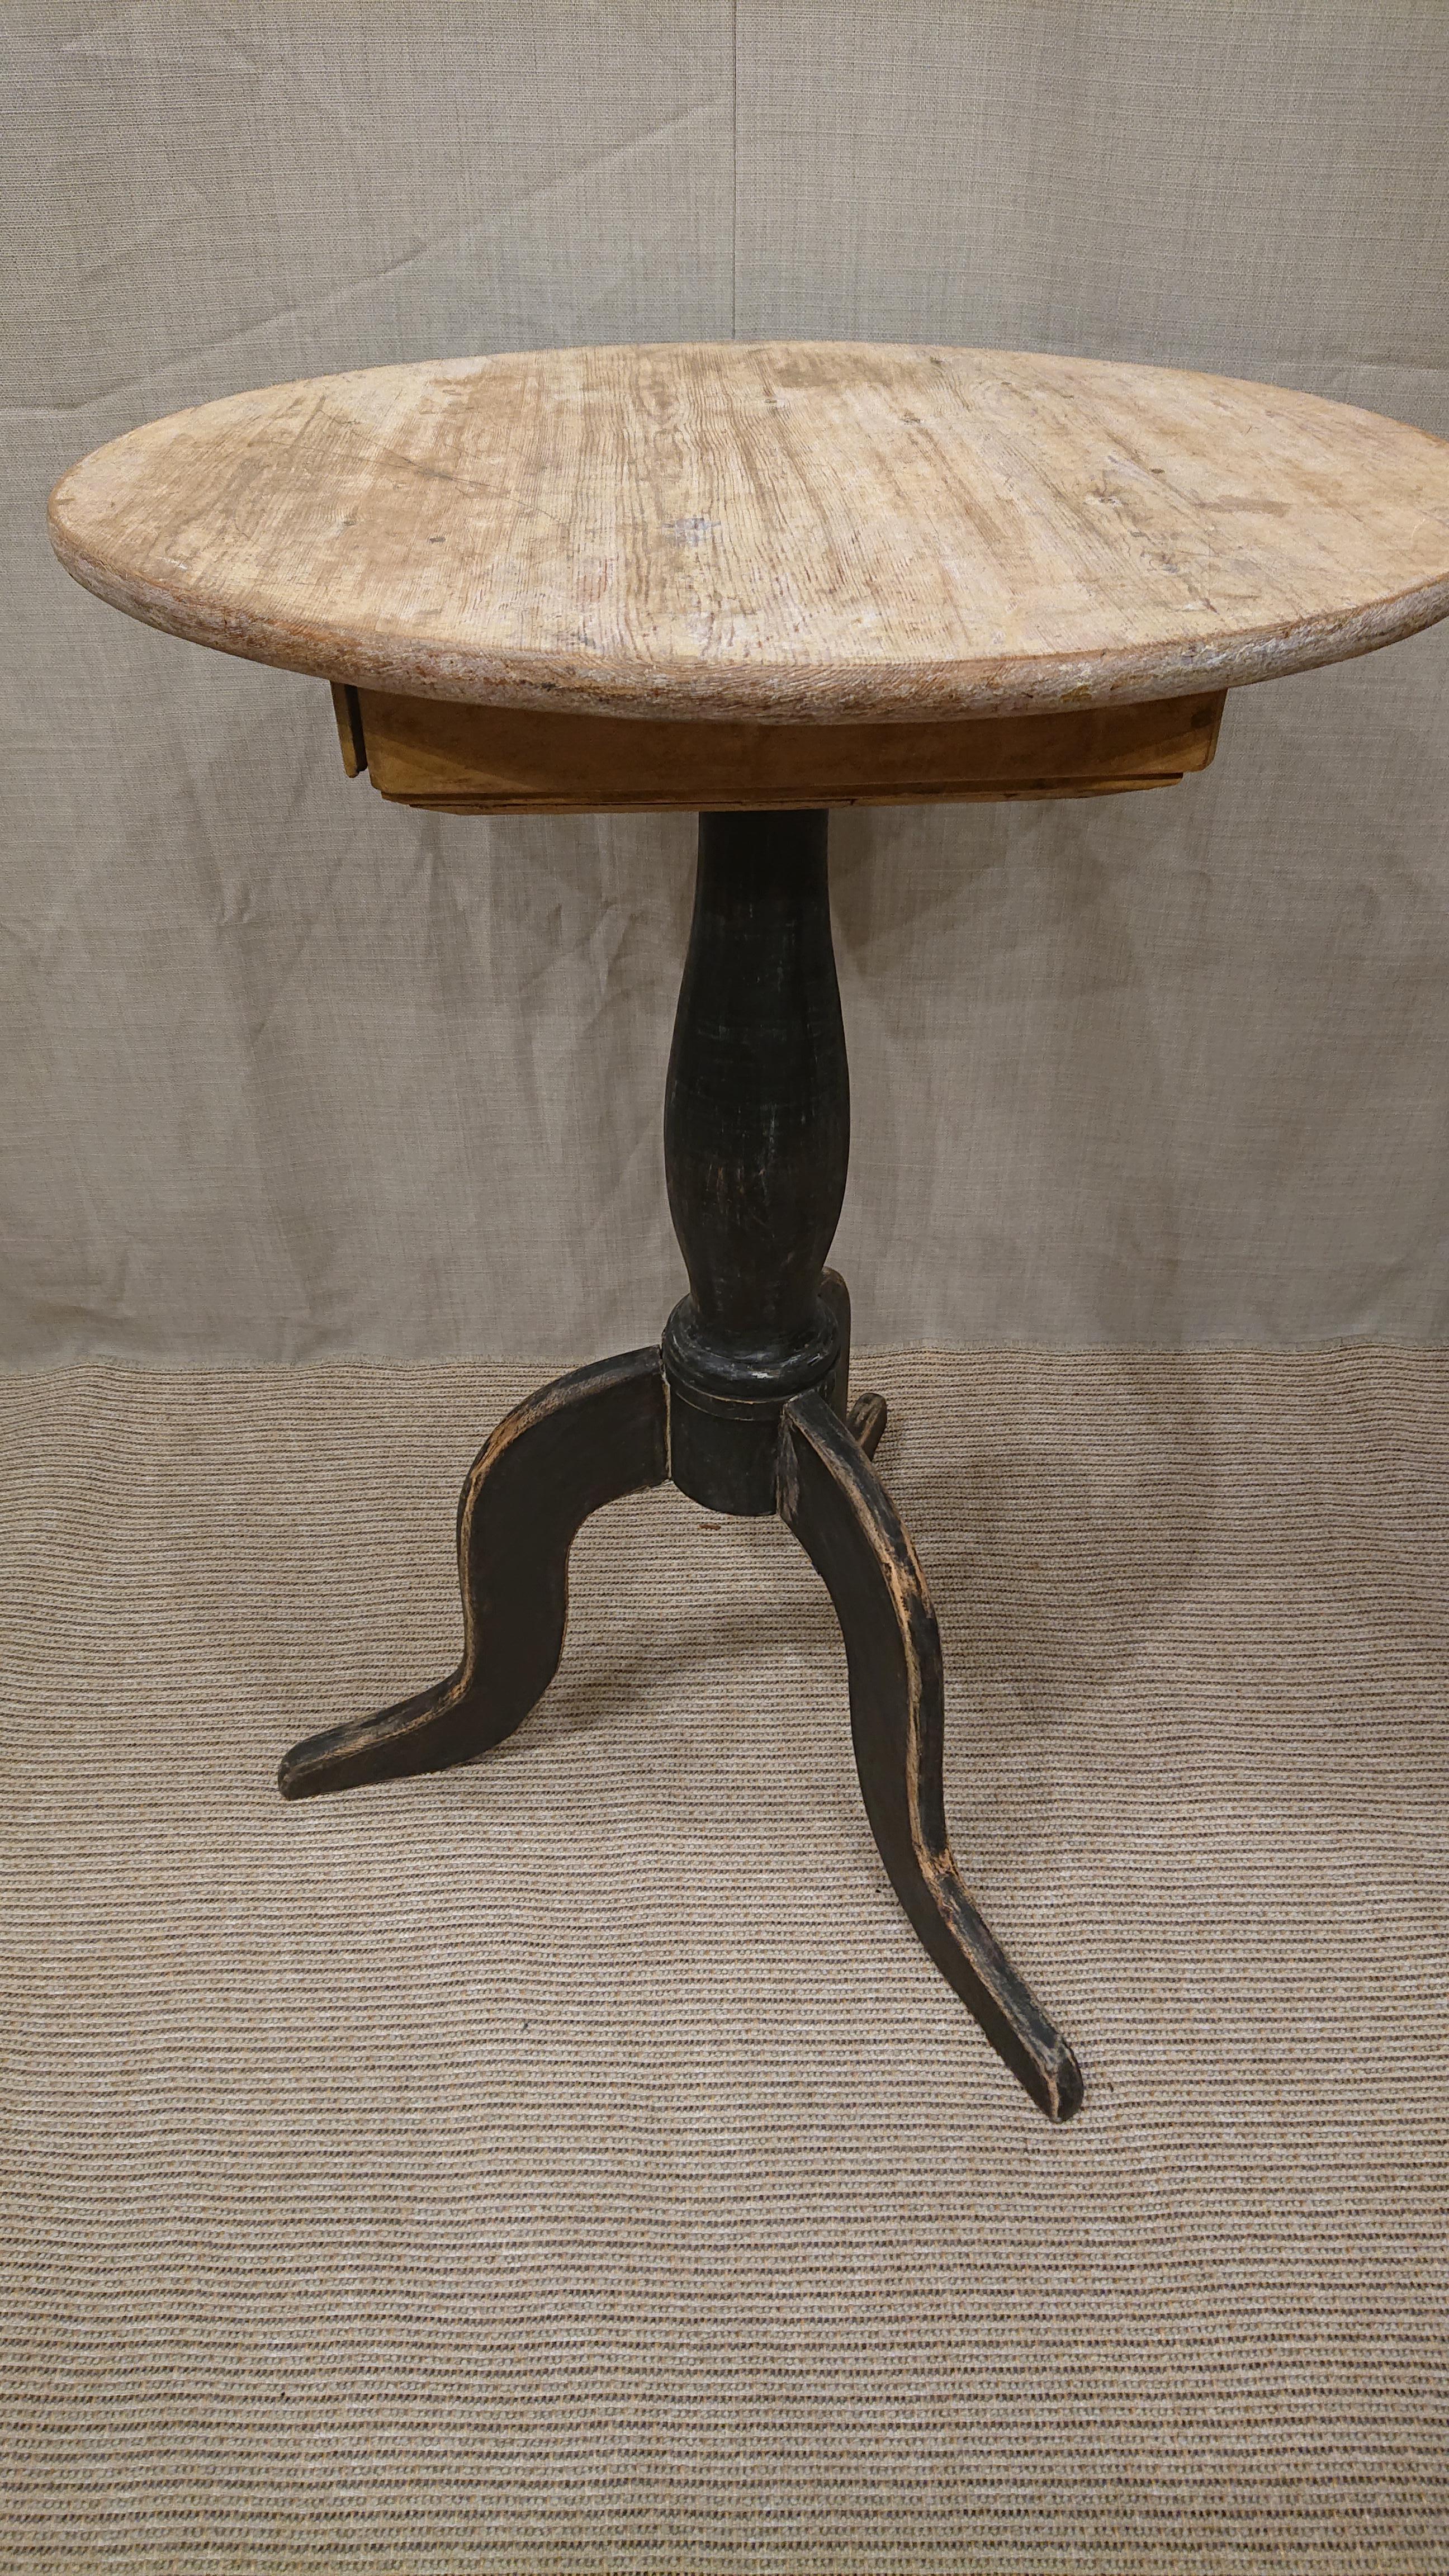 19th Century Swedish Empire Pedestal Table with Drawer & Original Paint For Sale 7